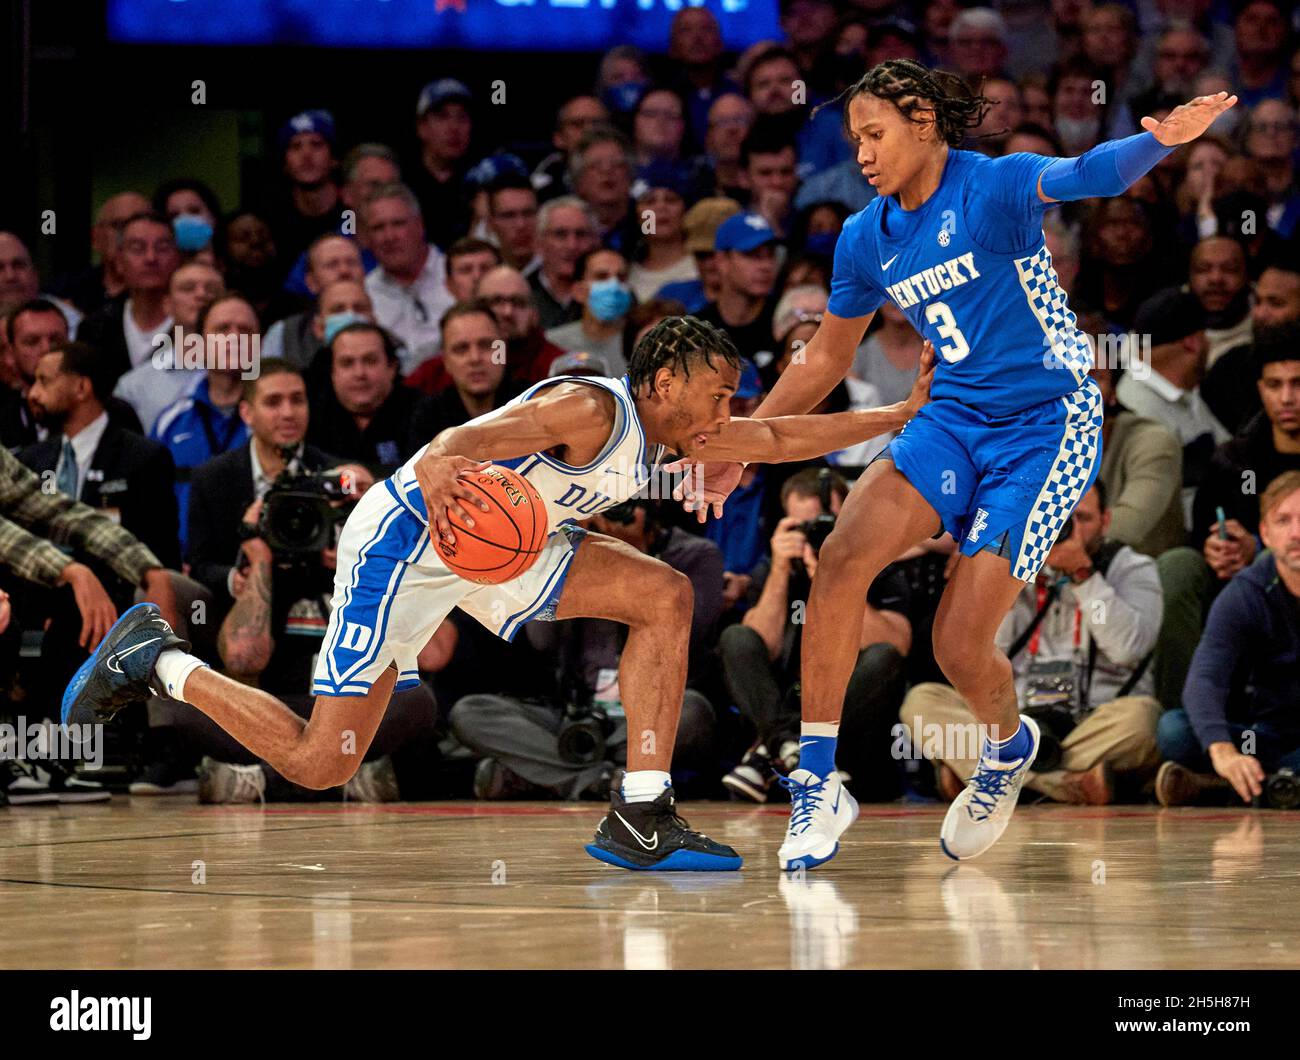 New York, New York, USA. 9th Nov, 2021. Duke Blue Devils guard Jeremy Roach (3) is defended by Kentucky Wildcats guard TyTy Washington (3) in the first half during the State Farm Champions Classic at Madison Square Garden in New York City. Duke defeated Kentucky 79-71. Duncan Williams/CSM/Alamy Live News Stock Photo